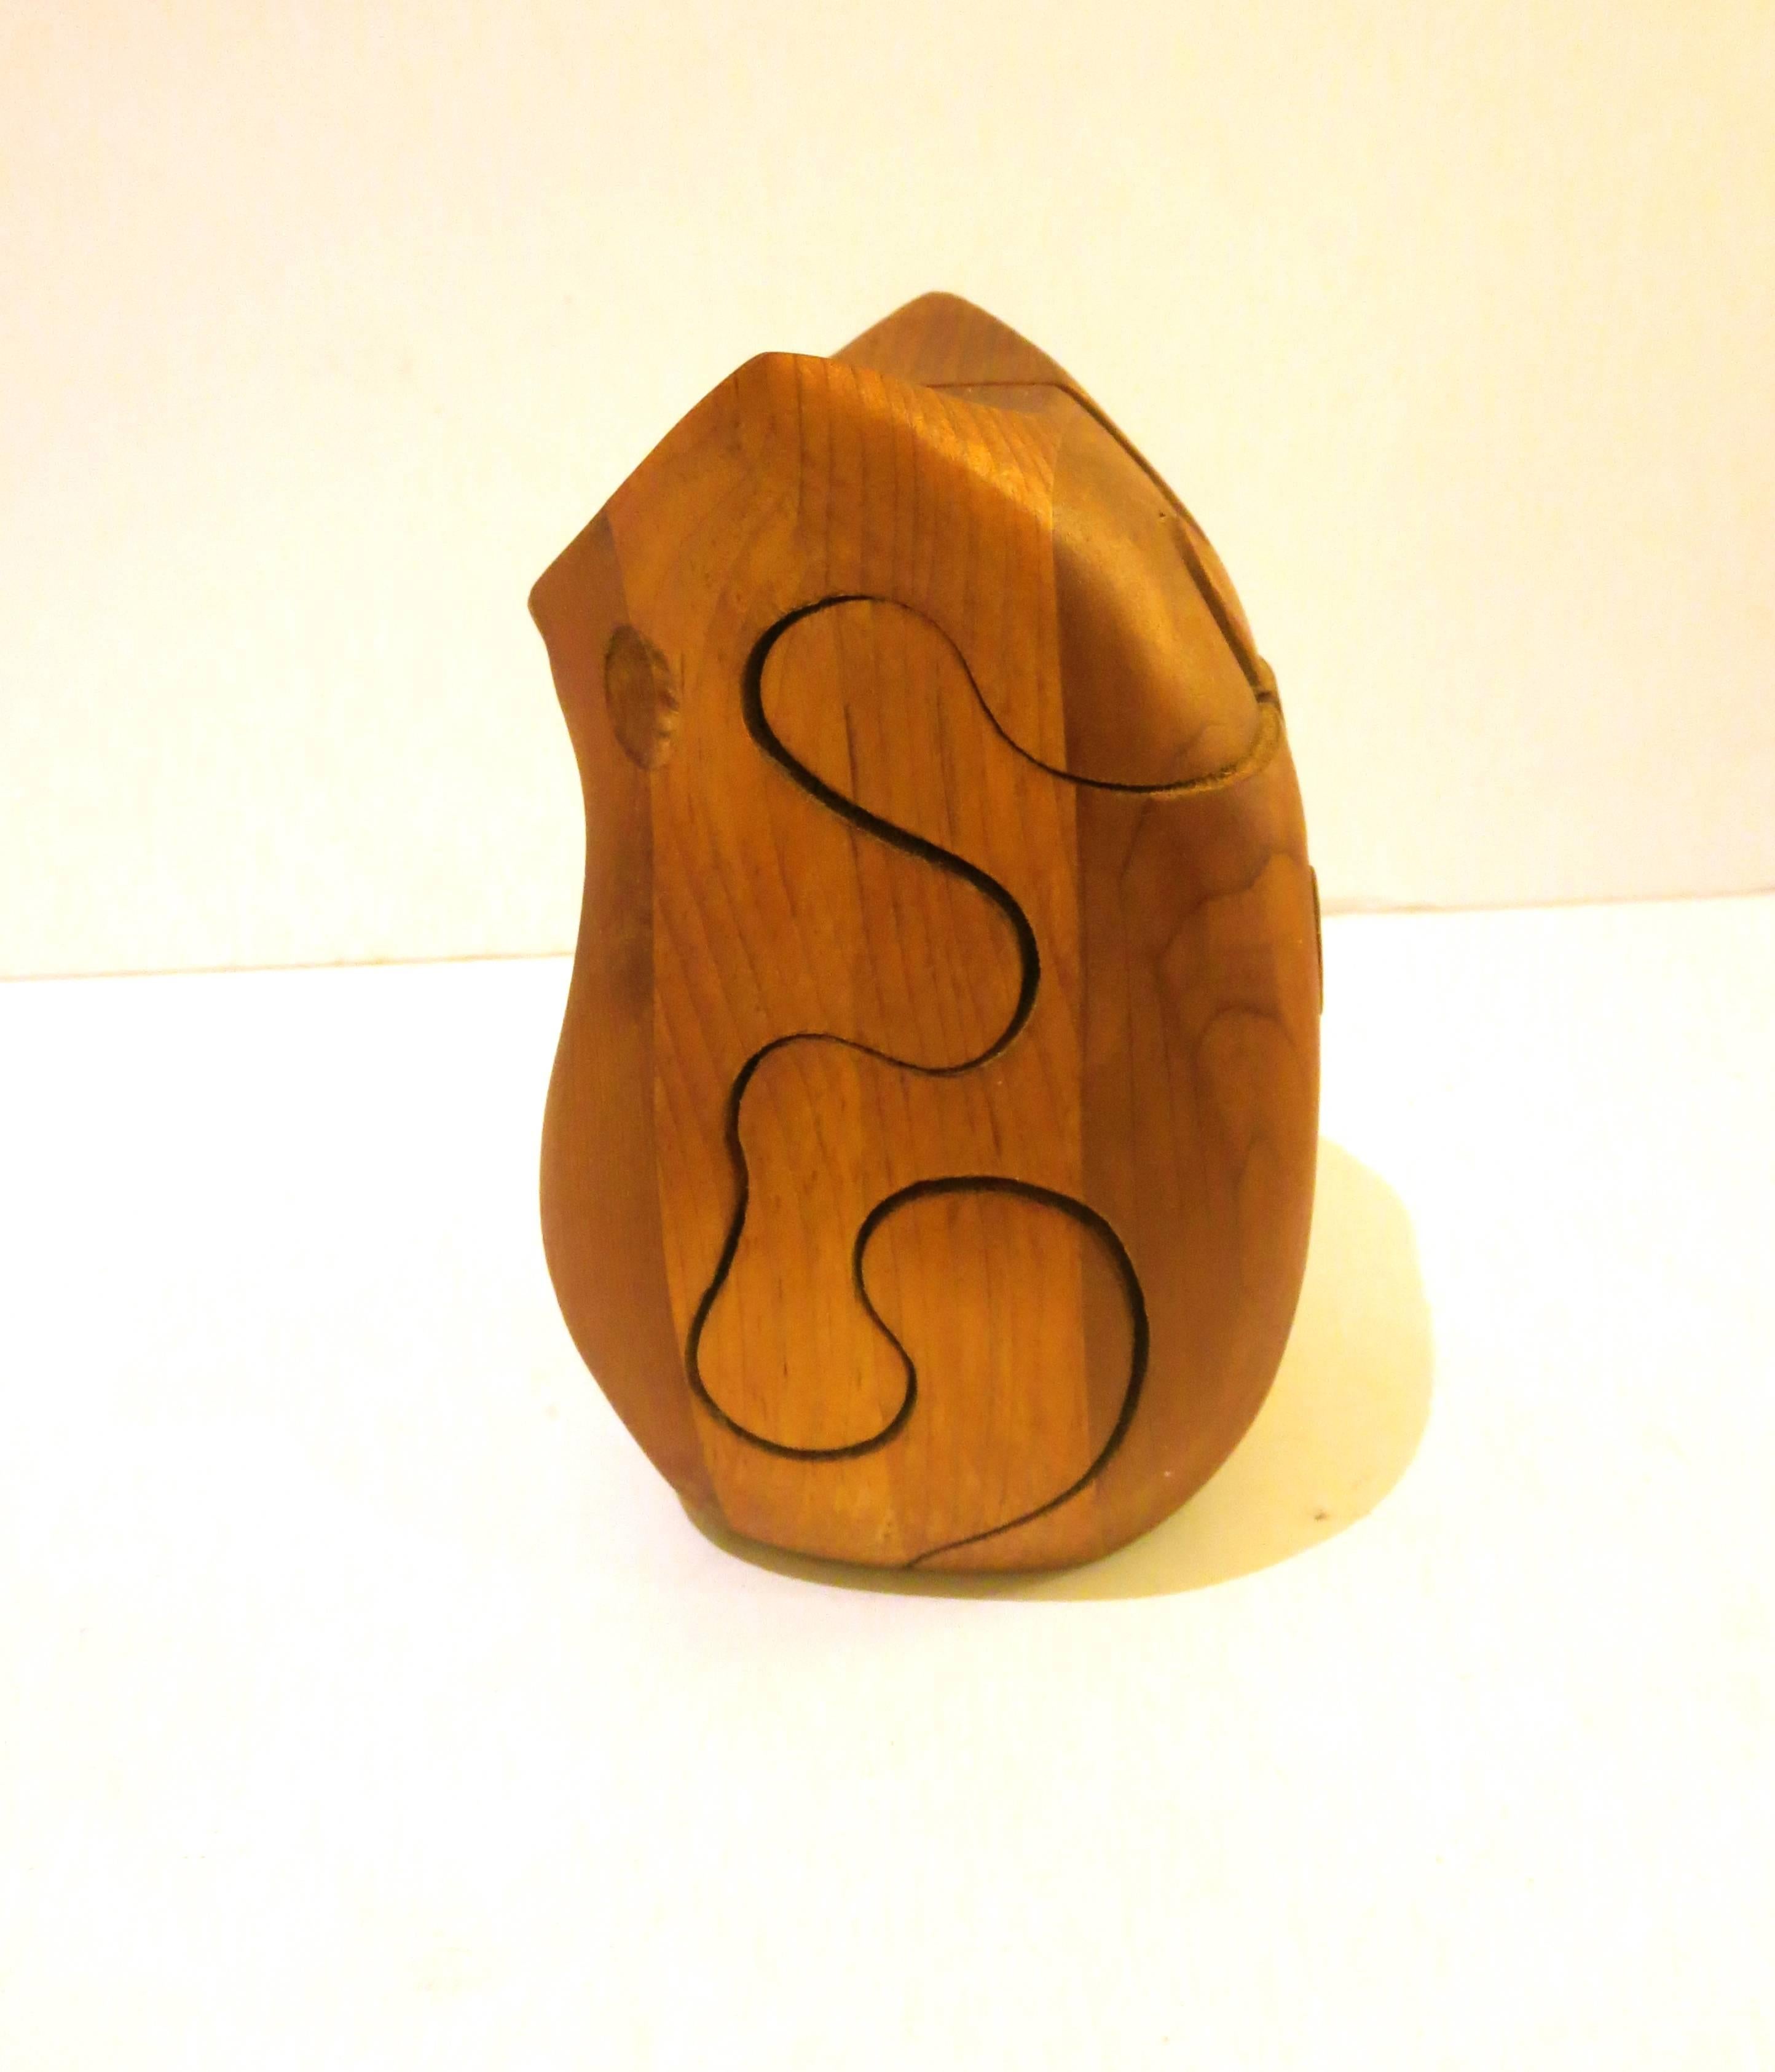 Mid-Century Modern Whimsical Wood Puzzle Sculpture by Artist Deborah Bump, Signed